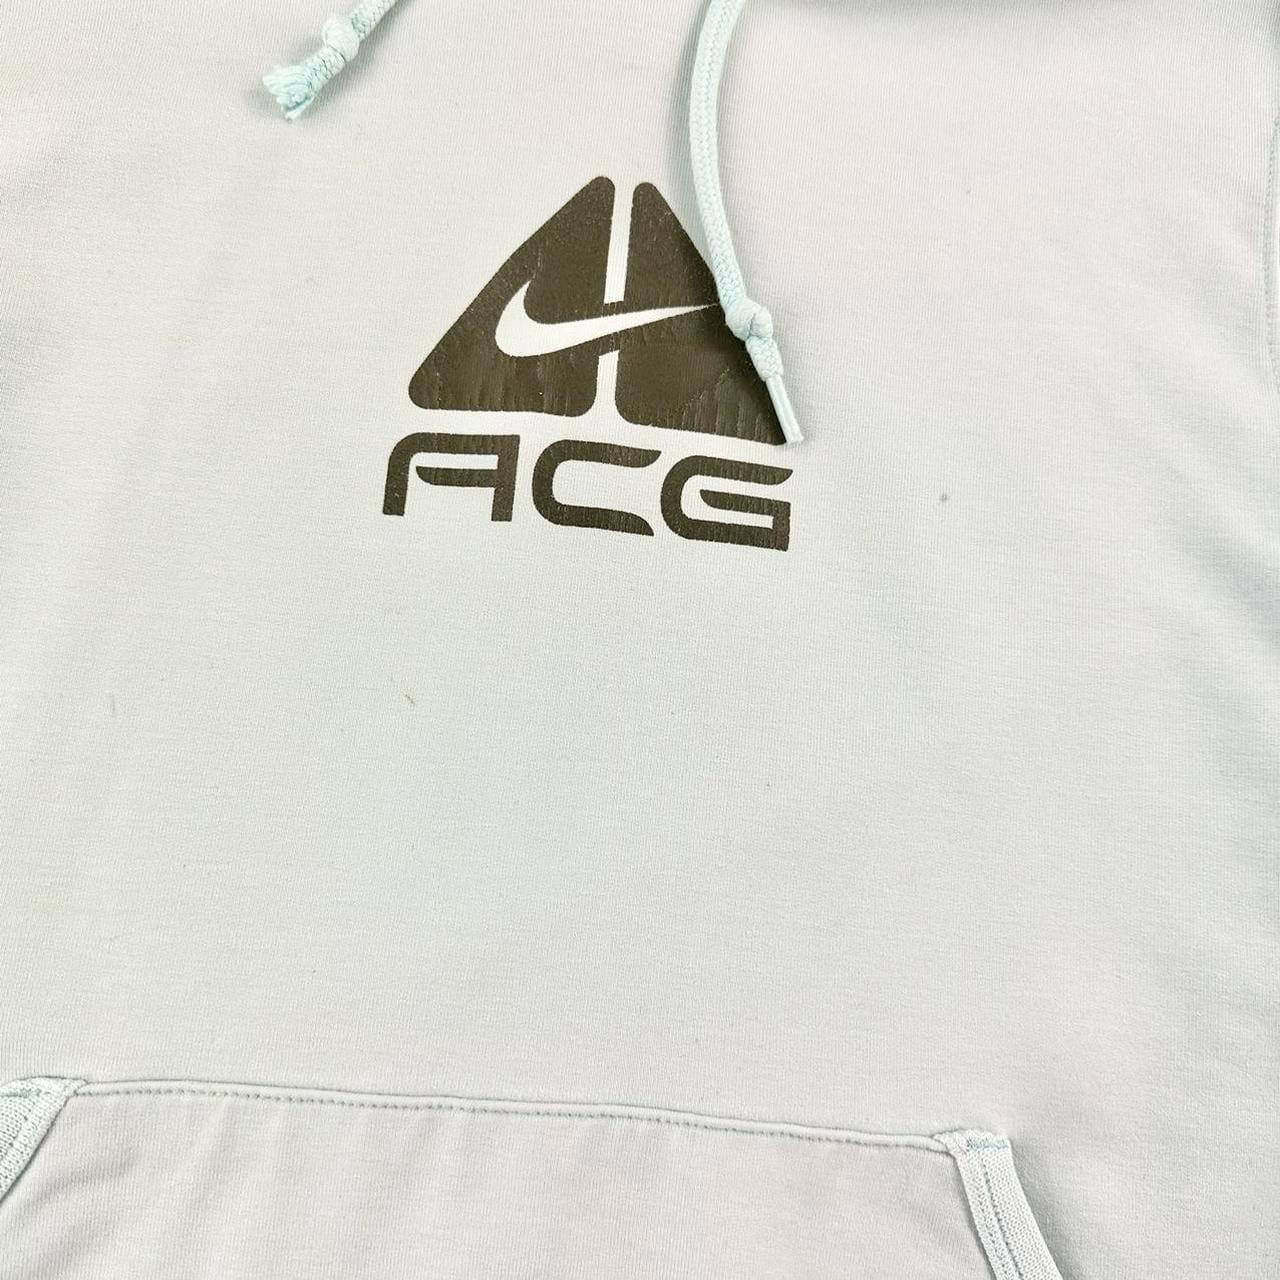 Vintage Nike ACG hoodie woman’s size S - Known Source